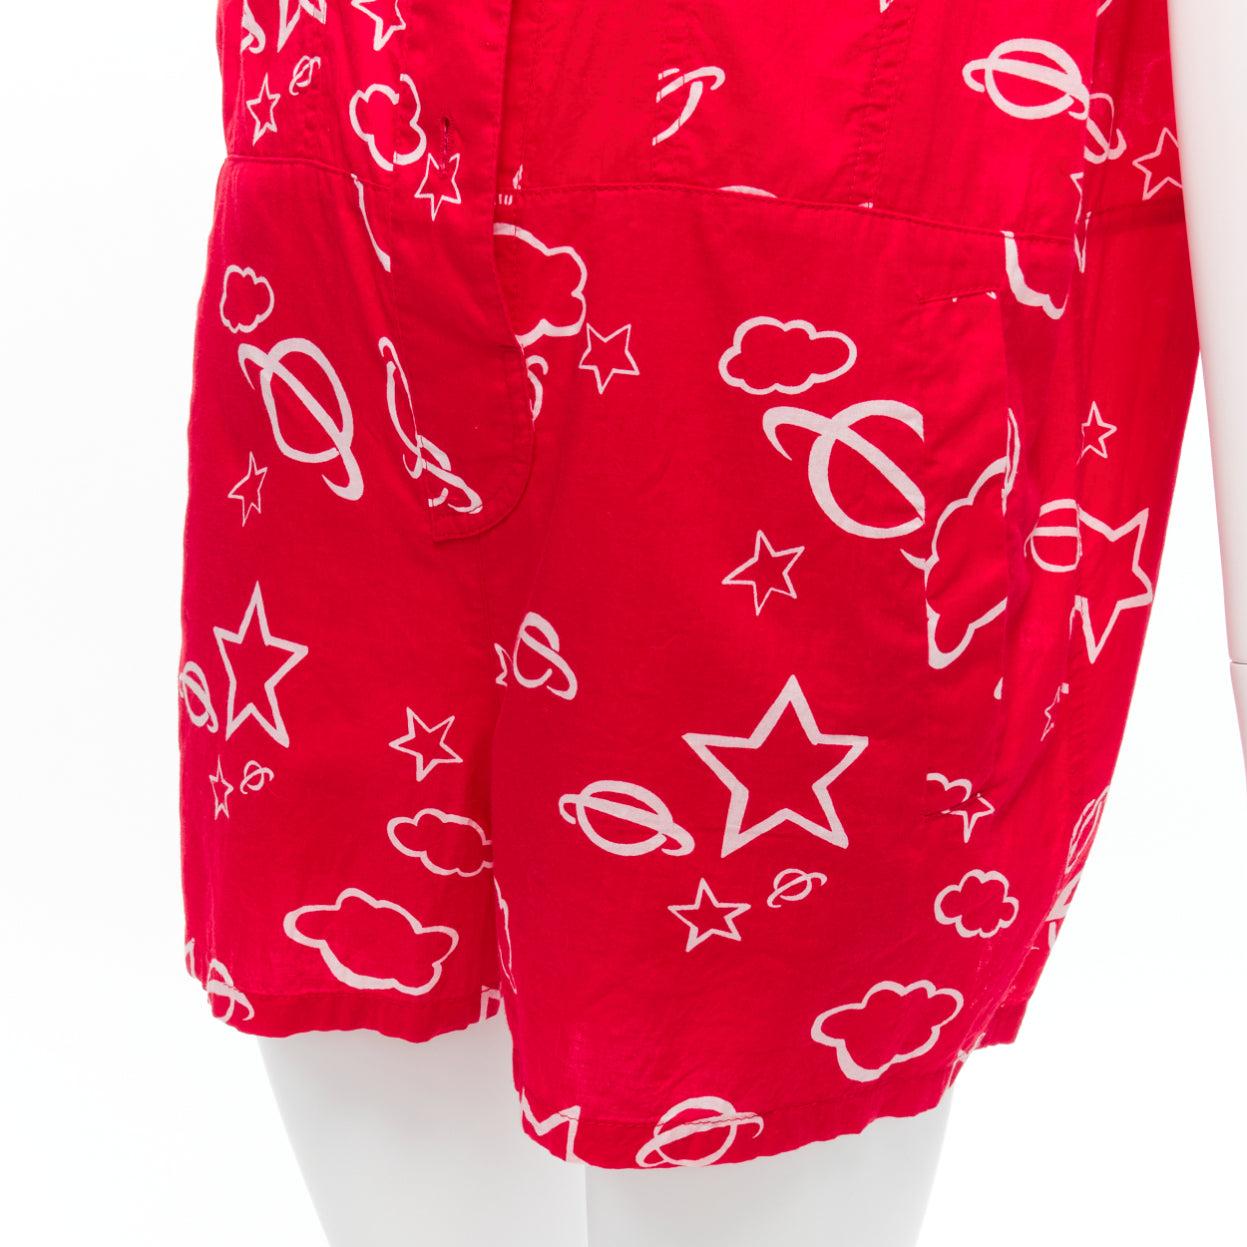 rare MIU MIU 2013 red white stars planets print cotton red pocketed romper plays 3